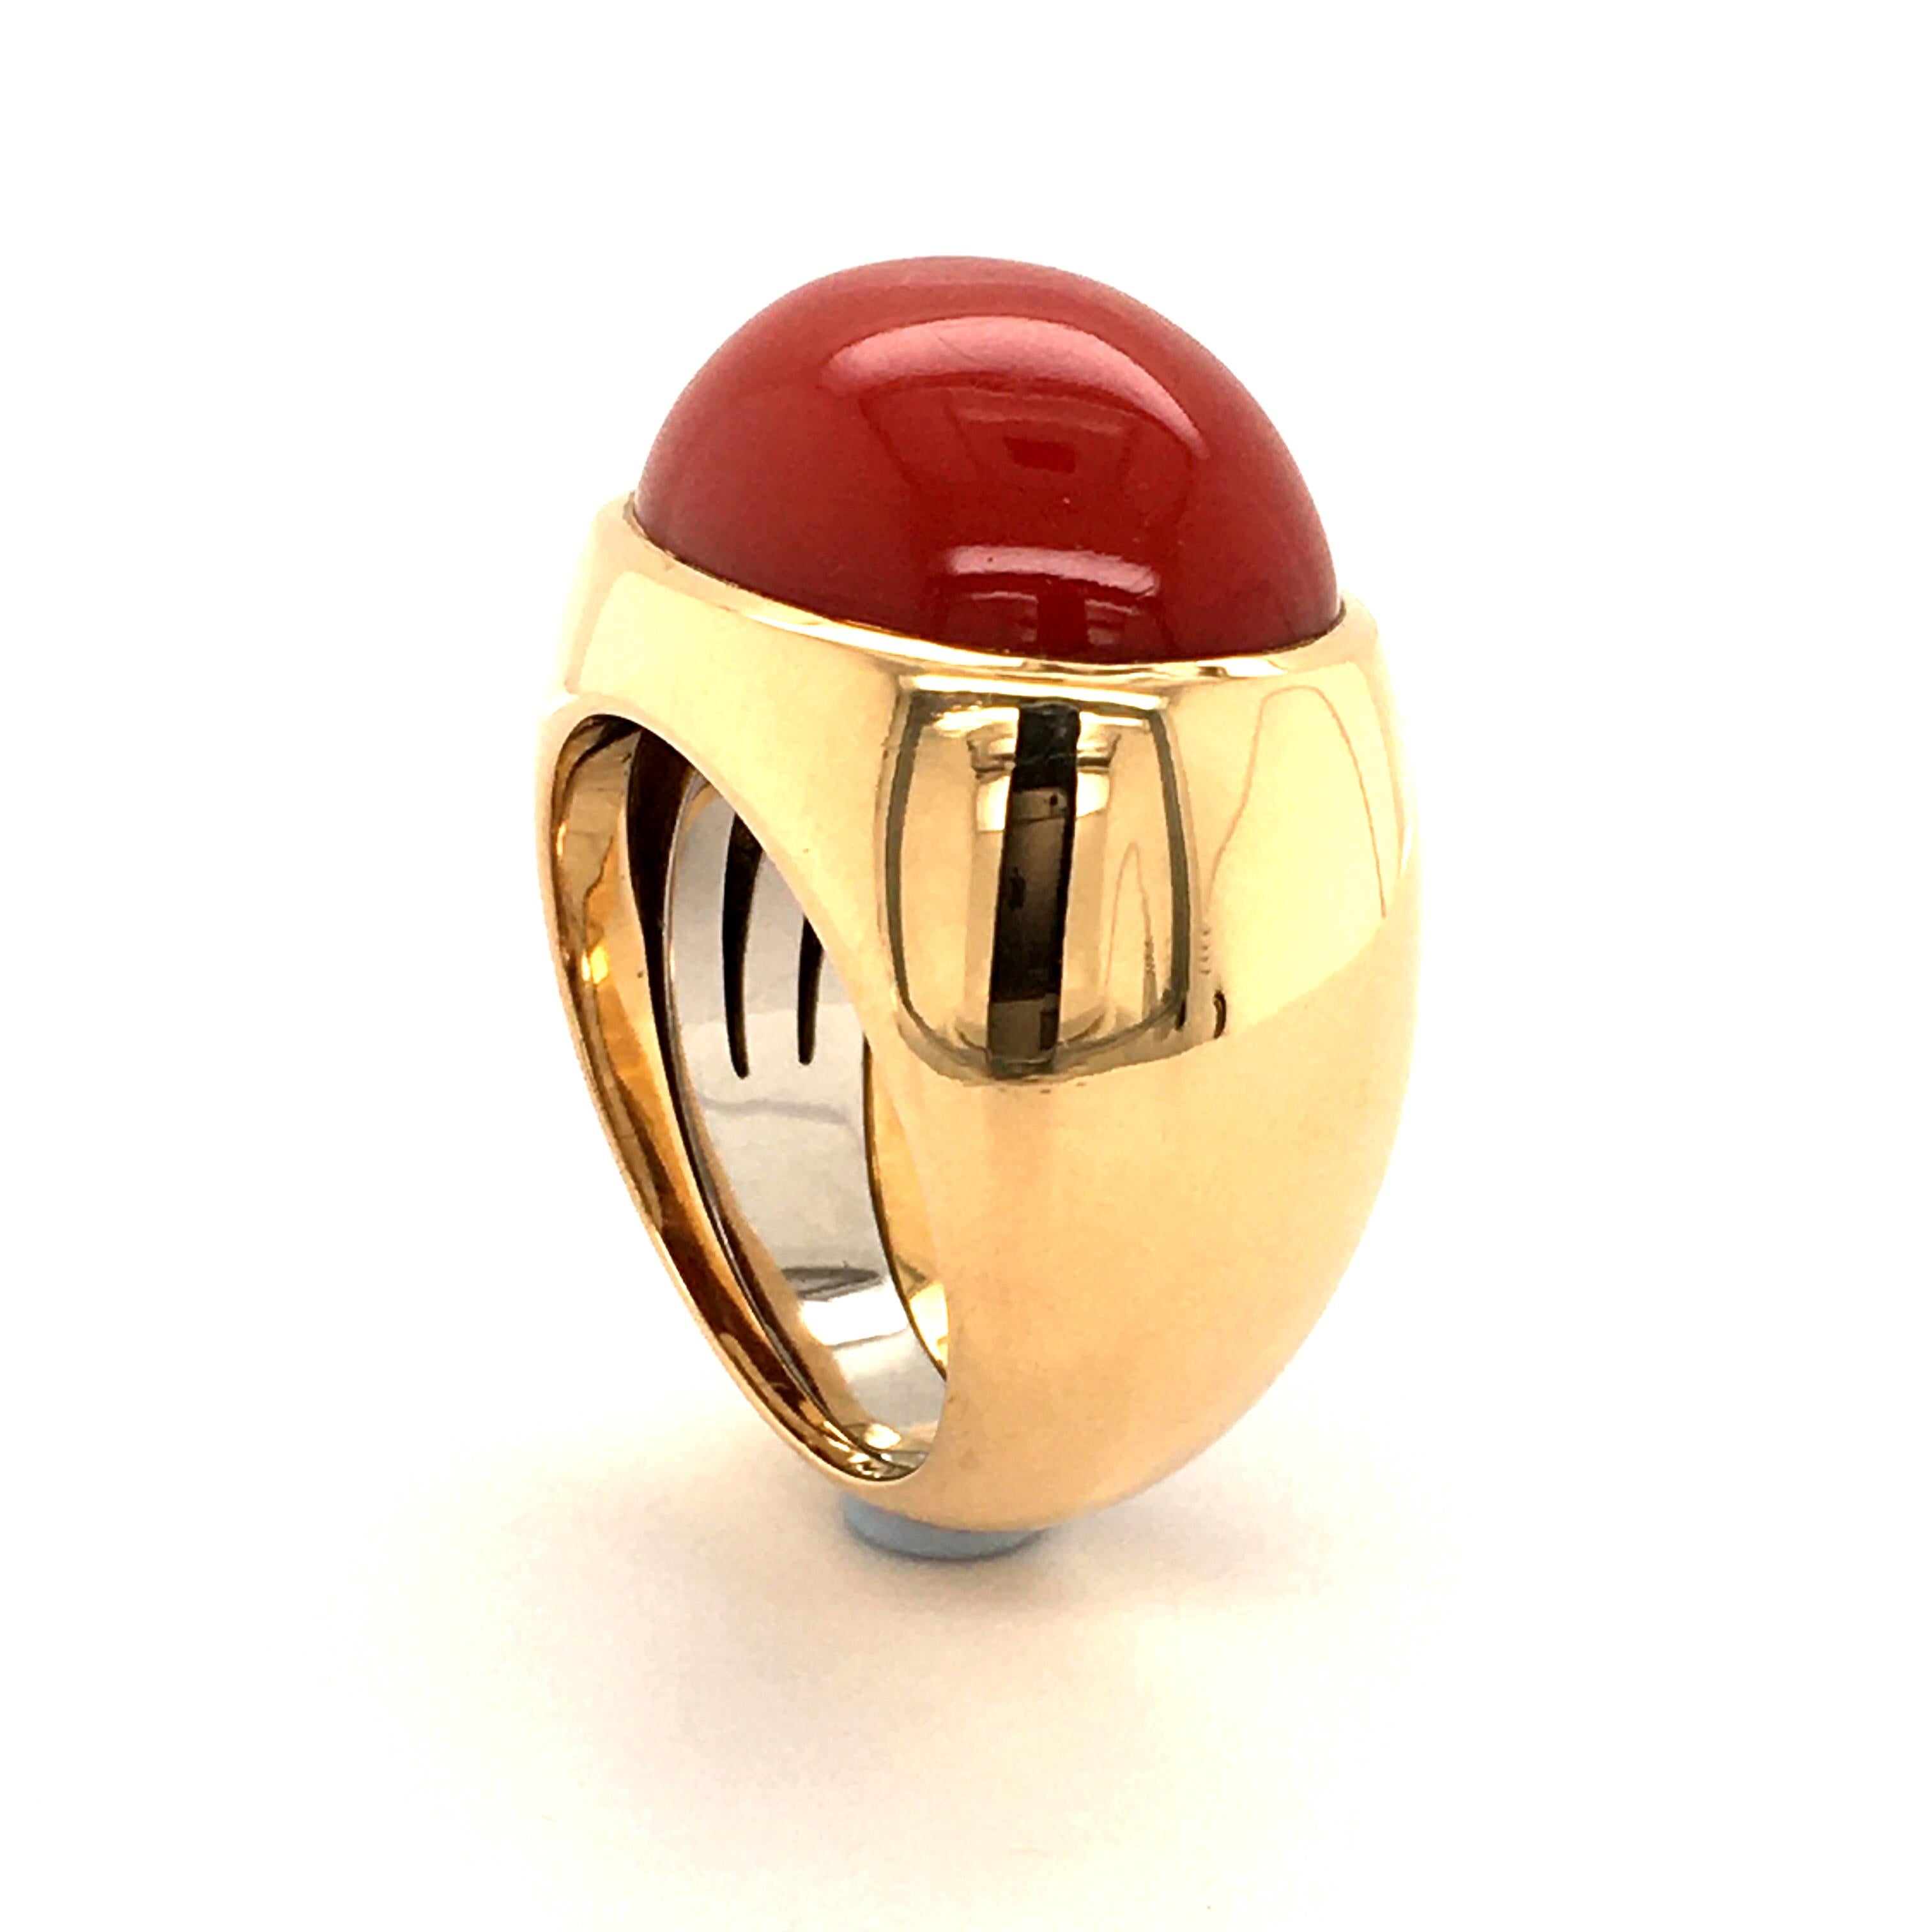 Elegant ring created by Swiss Jeweller Péclard in yellow and white gold 750 and set with 1 oval cabochon cut red coral.

Coral Measurements:  mm

Please, ask for additional pictures if you are interested in this item.

Weight: 30.64 grams
Ring Size: